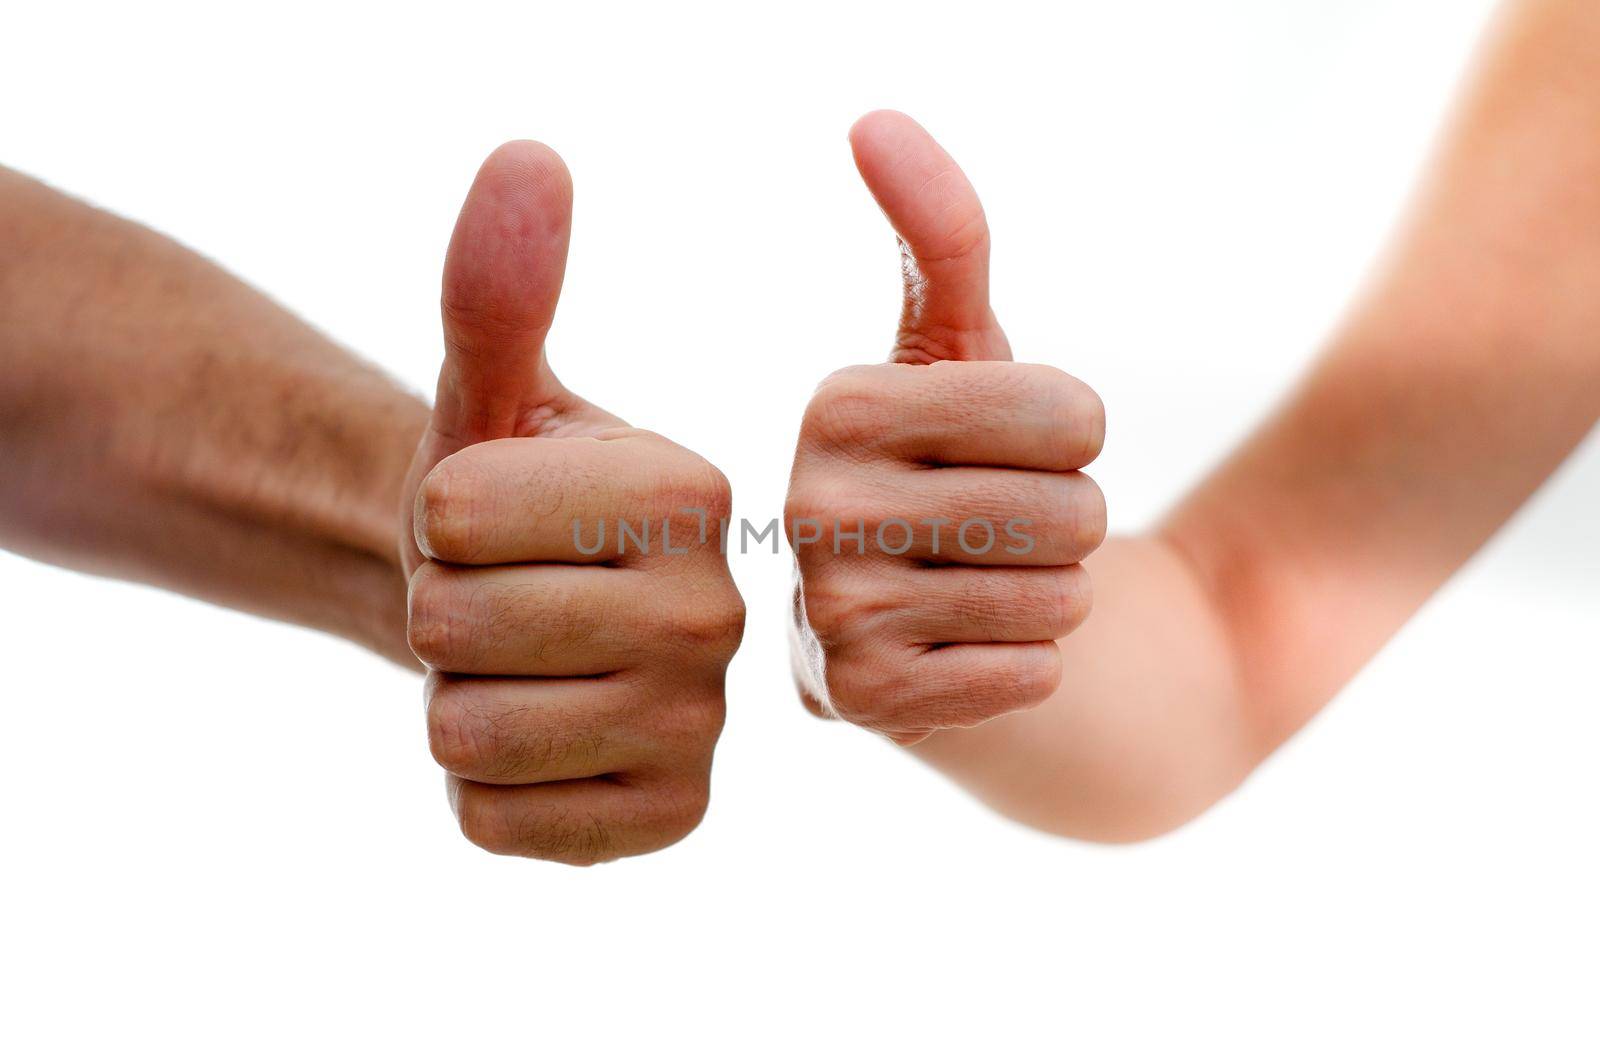 Man and woman hands showing thumbs up sign isolated on white by javiindy